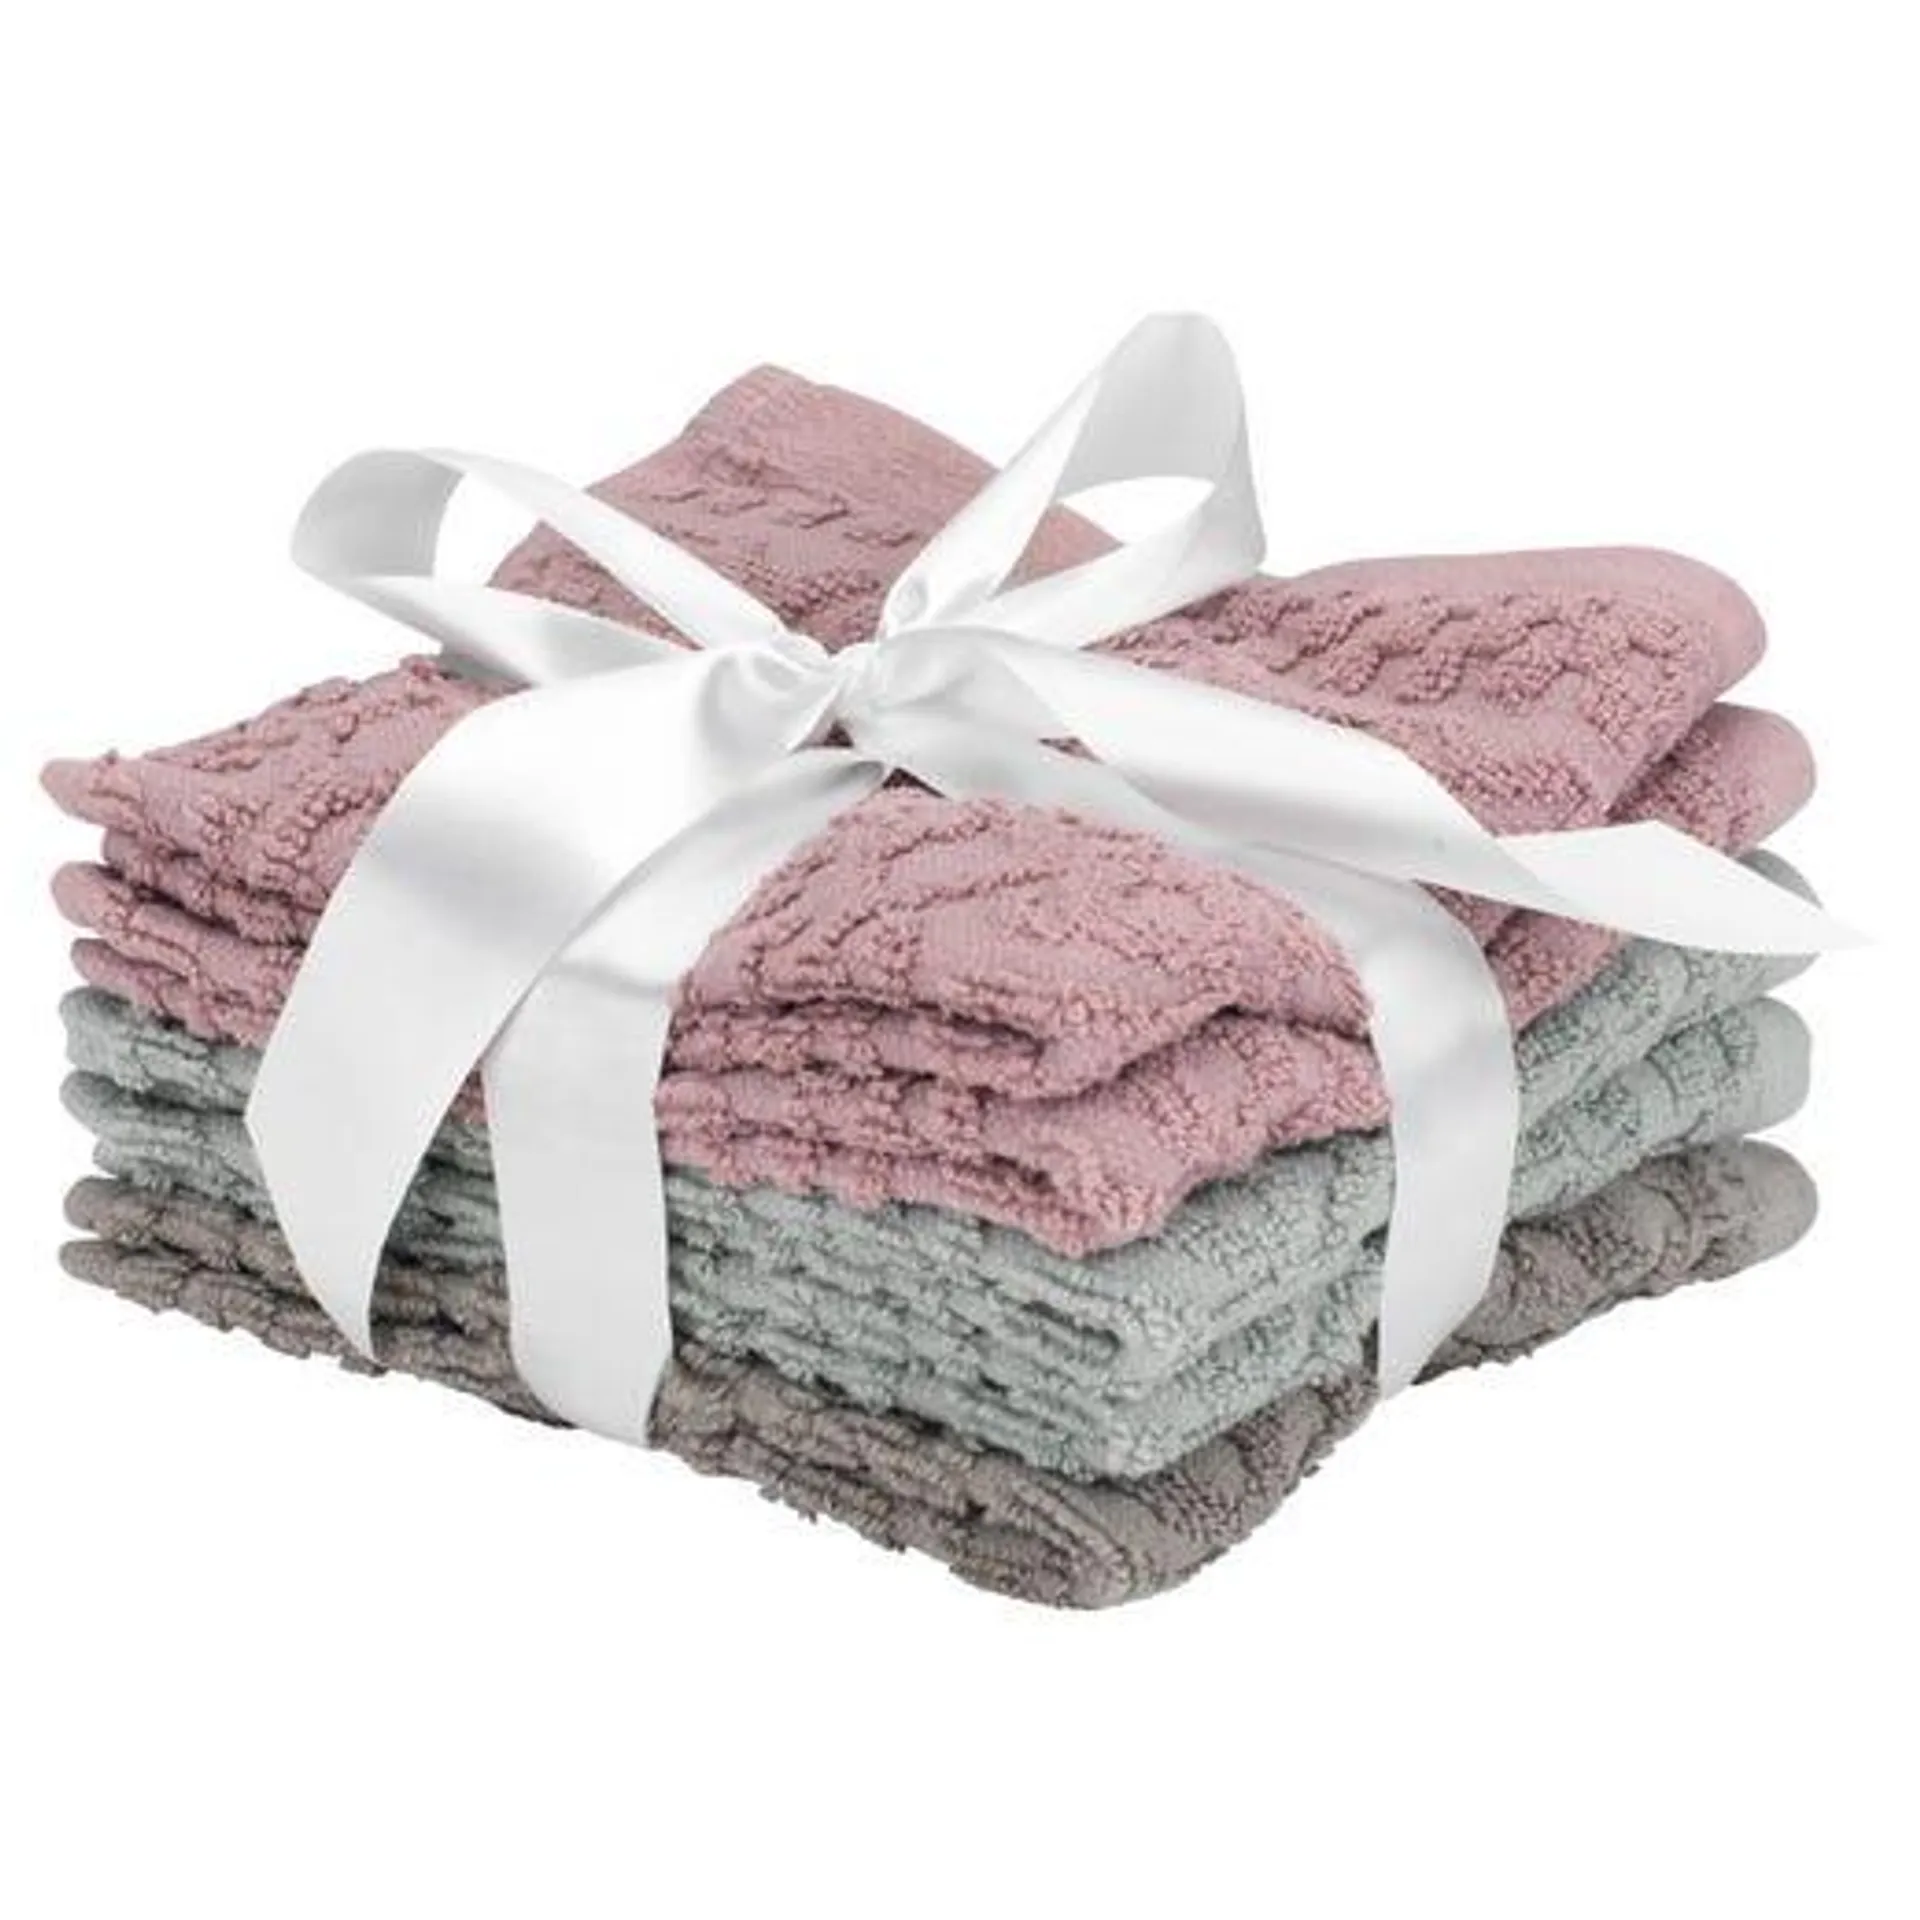 100% Cotton Jacquard Woven Washcloth (Pack of 5)